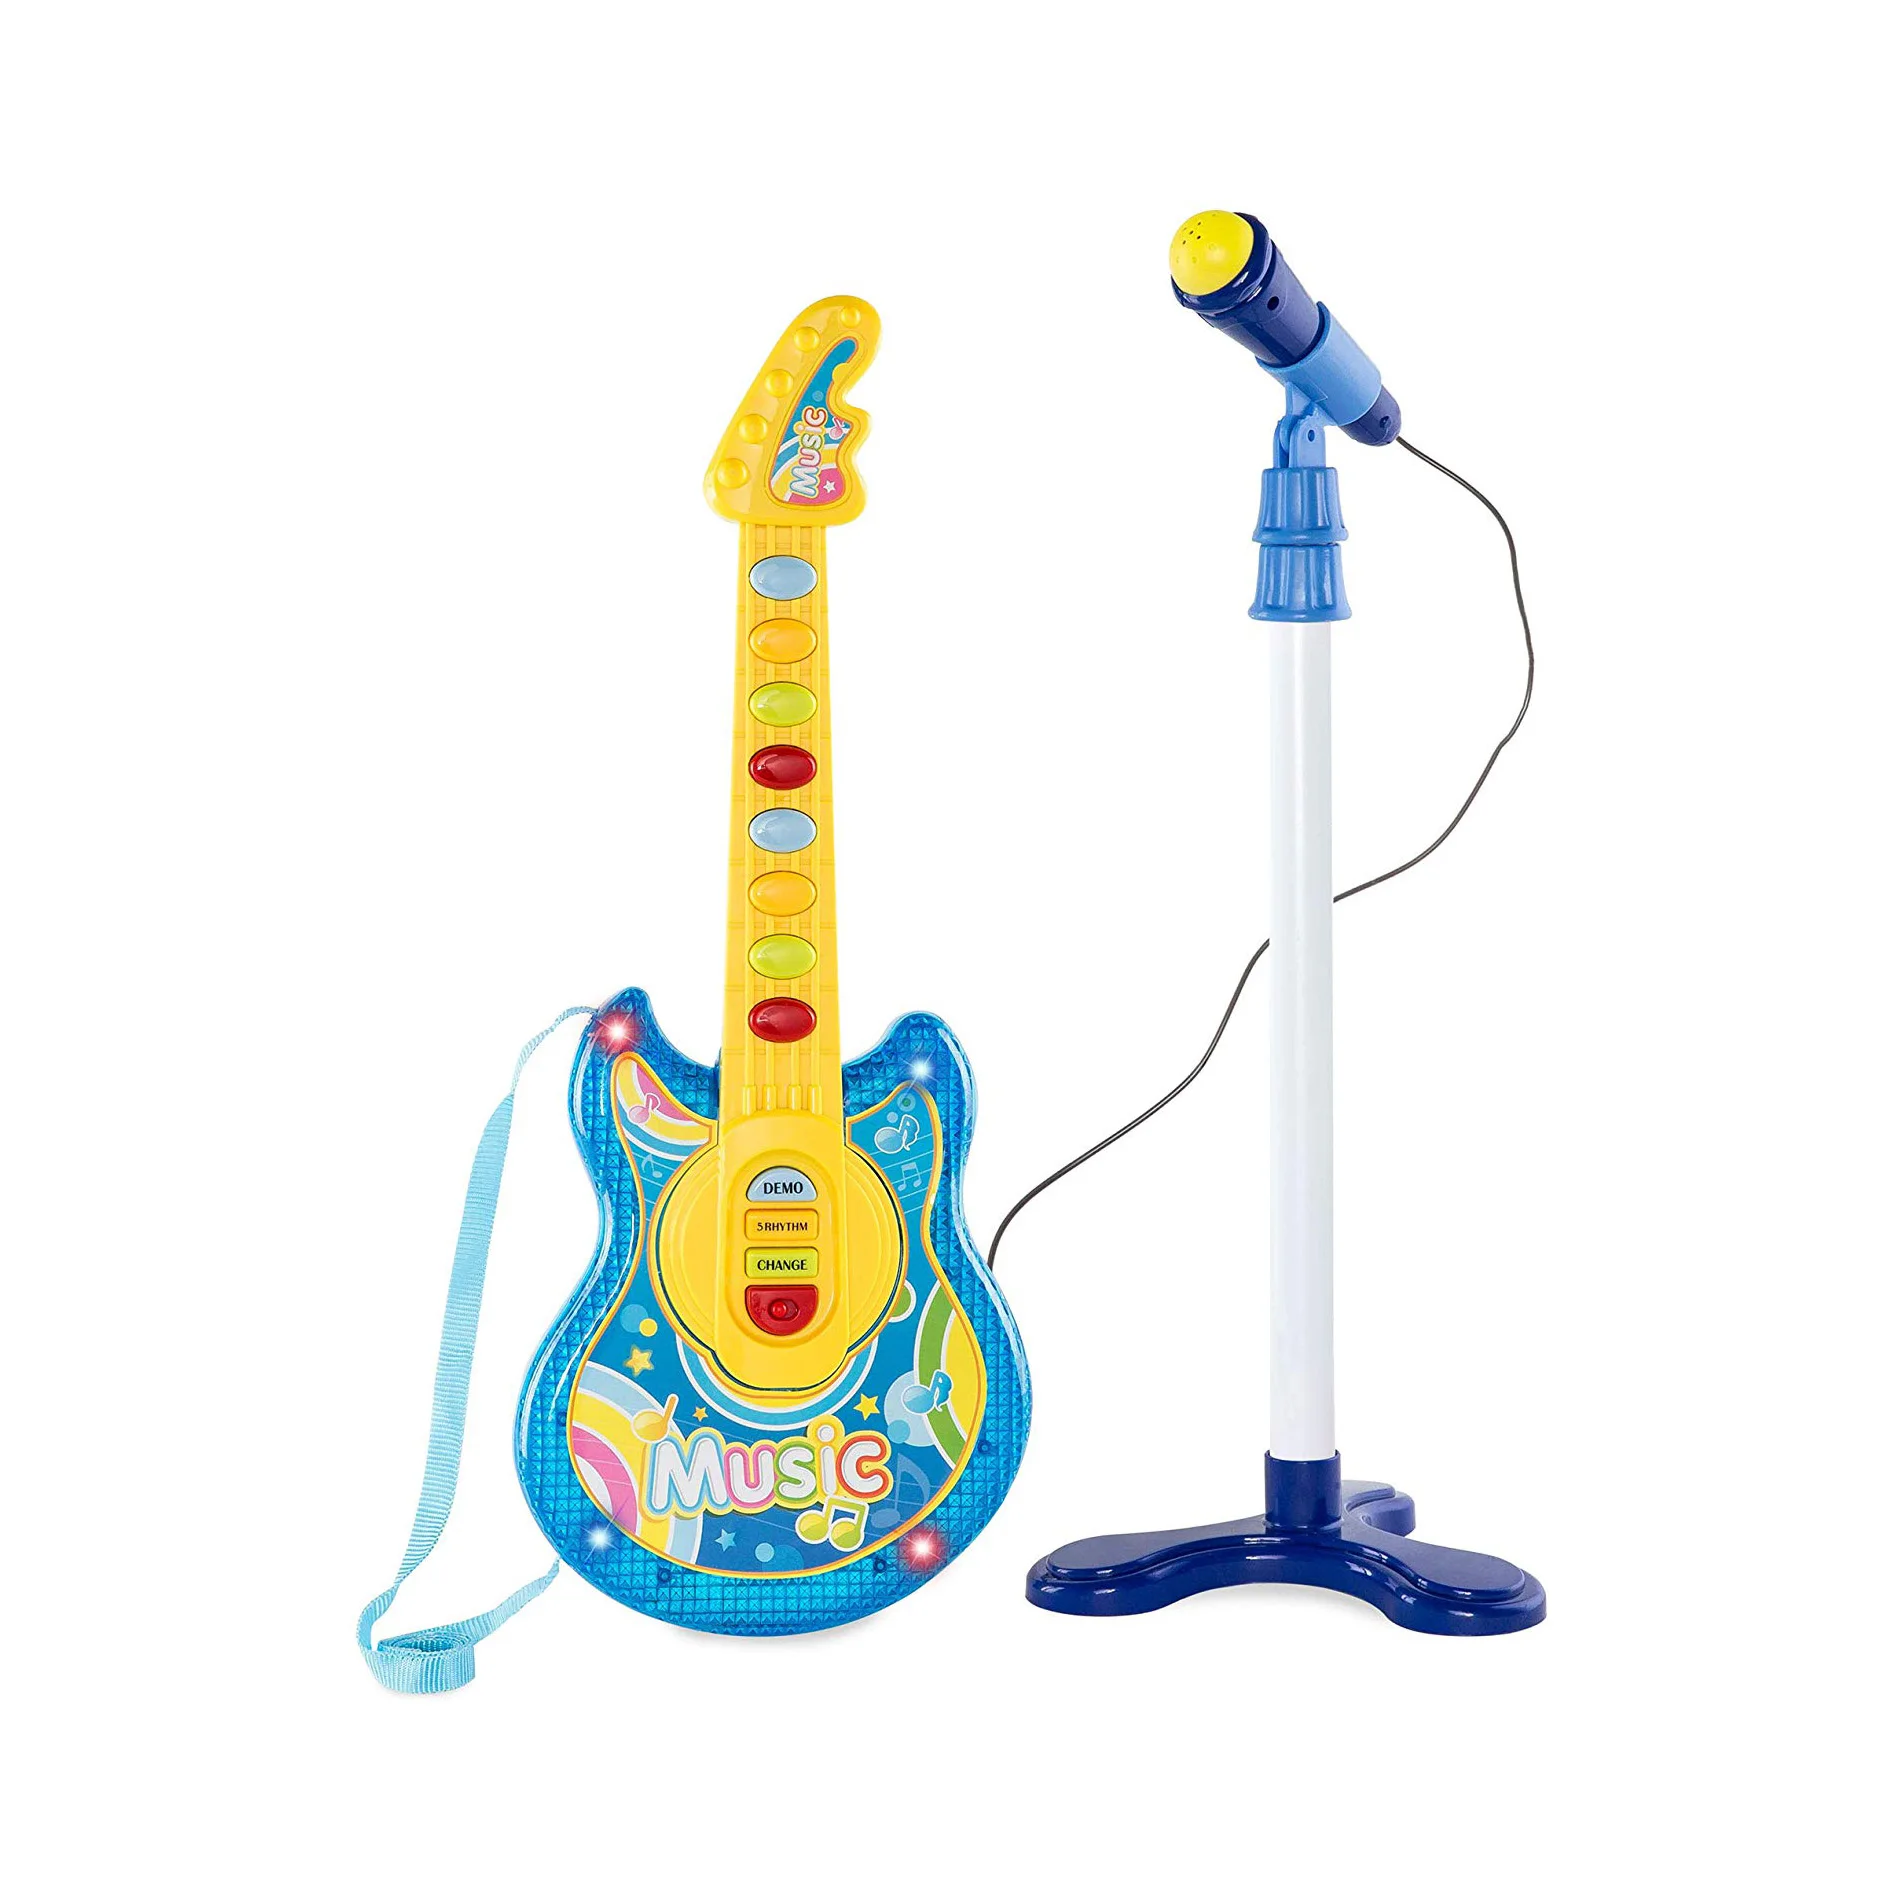 Toddlers Toy for Boys and Girls with Vibrant Sounds/ Colorful Lights DOTSOG Guitar for Kids 19in Kids Toddlers Flash Guitar Pretend Musical Instrument Toy,Great Gift for Kids 